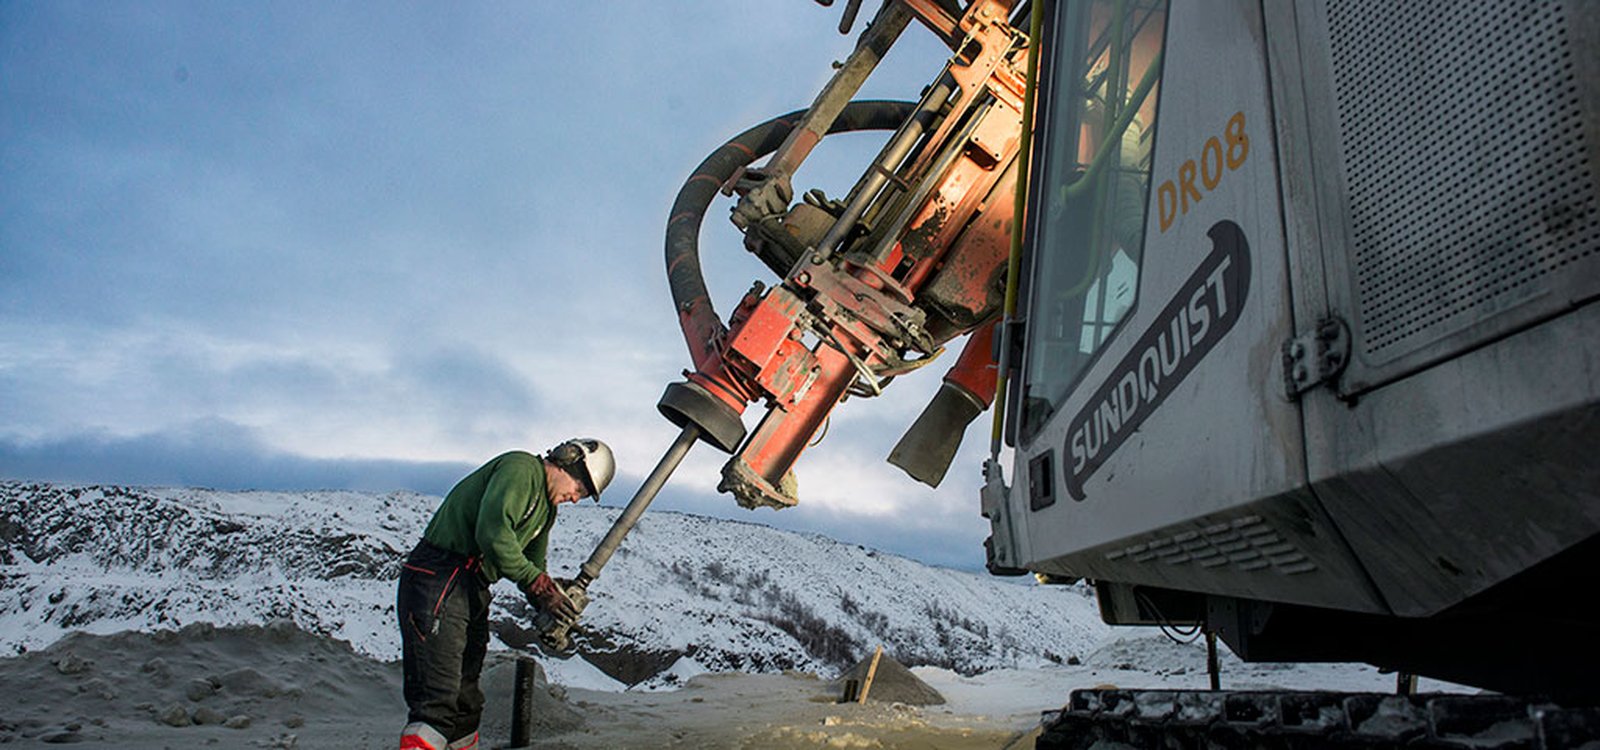 At Sydvaranger, top hammer drilling uses less fuel with better penetration than down-the-hole drilling. 